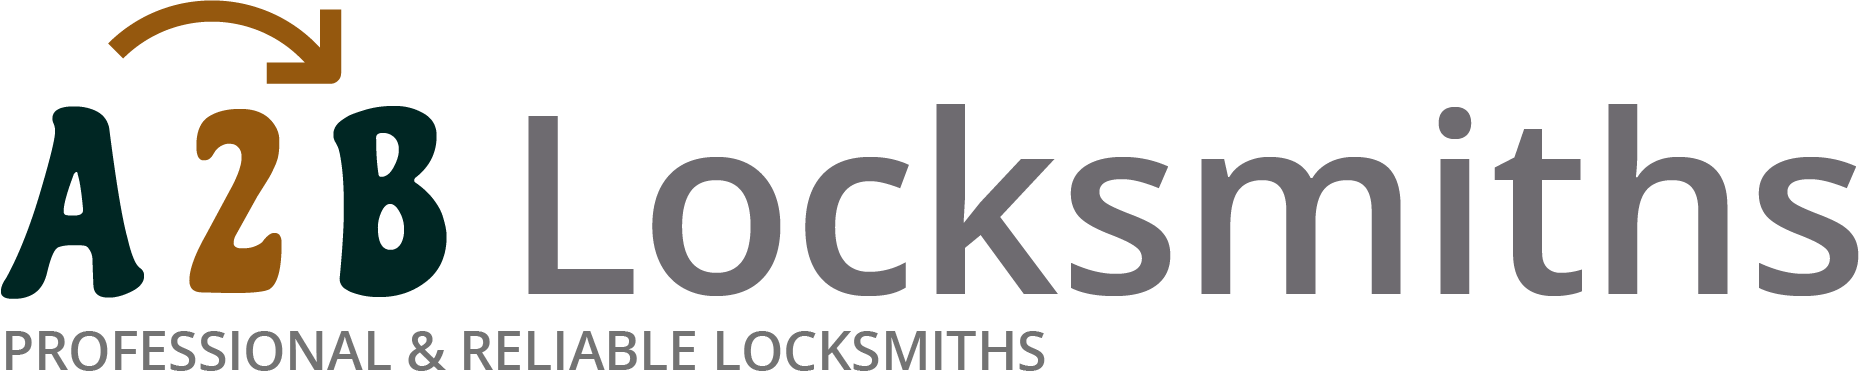 If you are locked out of house in Aldershot, our 24/7 local emergency locksmith services can help you.